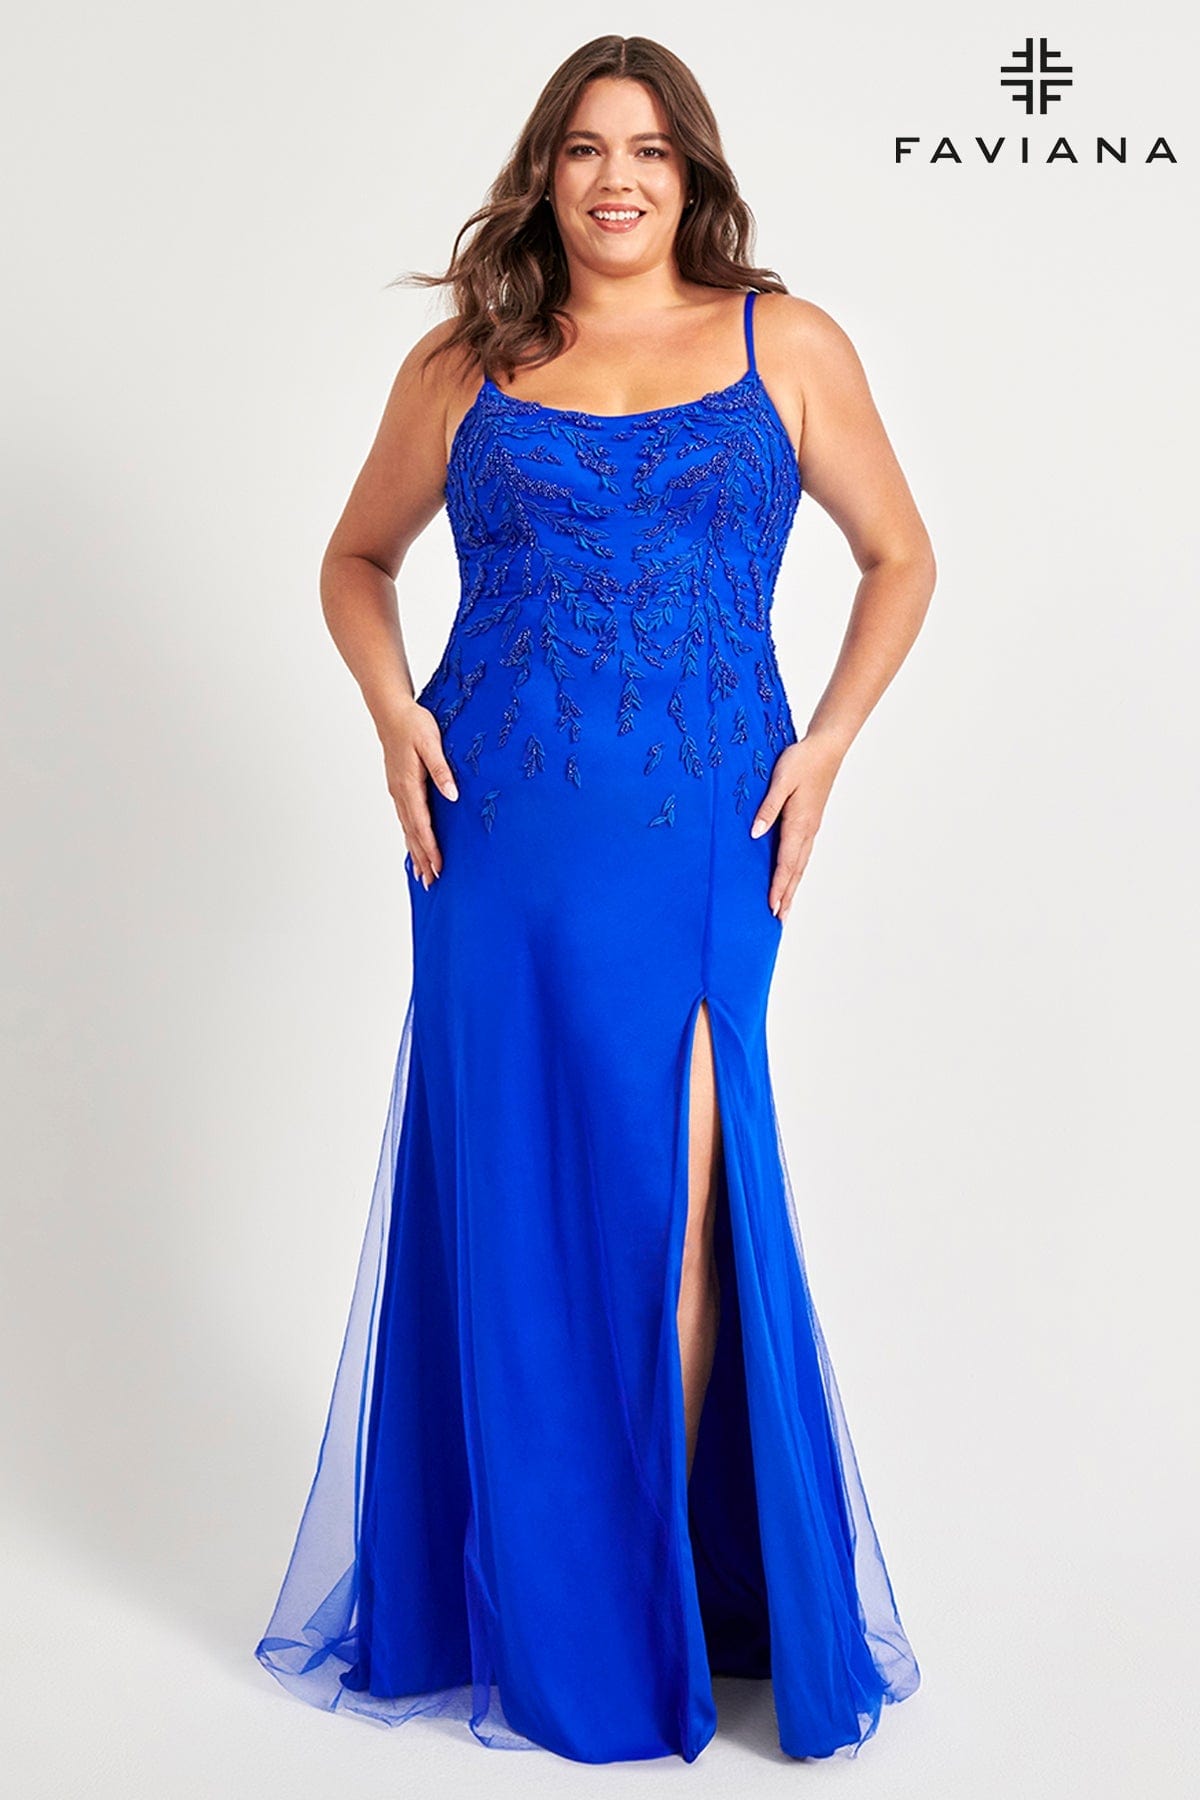 Plus-Size Formal Dresses for Prom, Bridesmaid Gowns